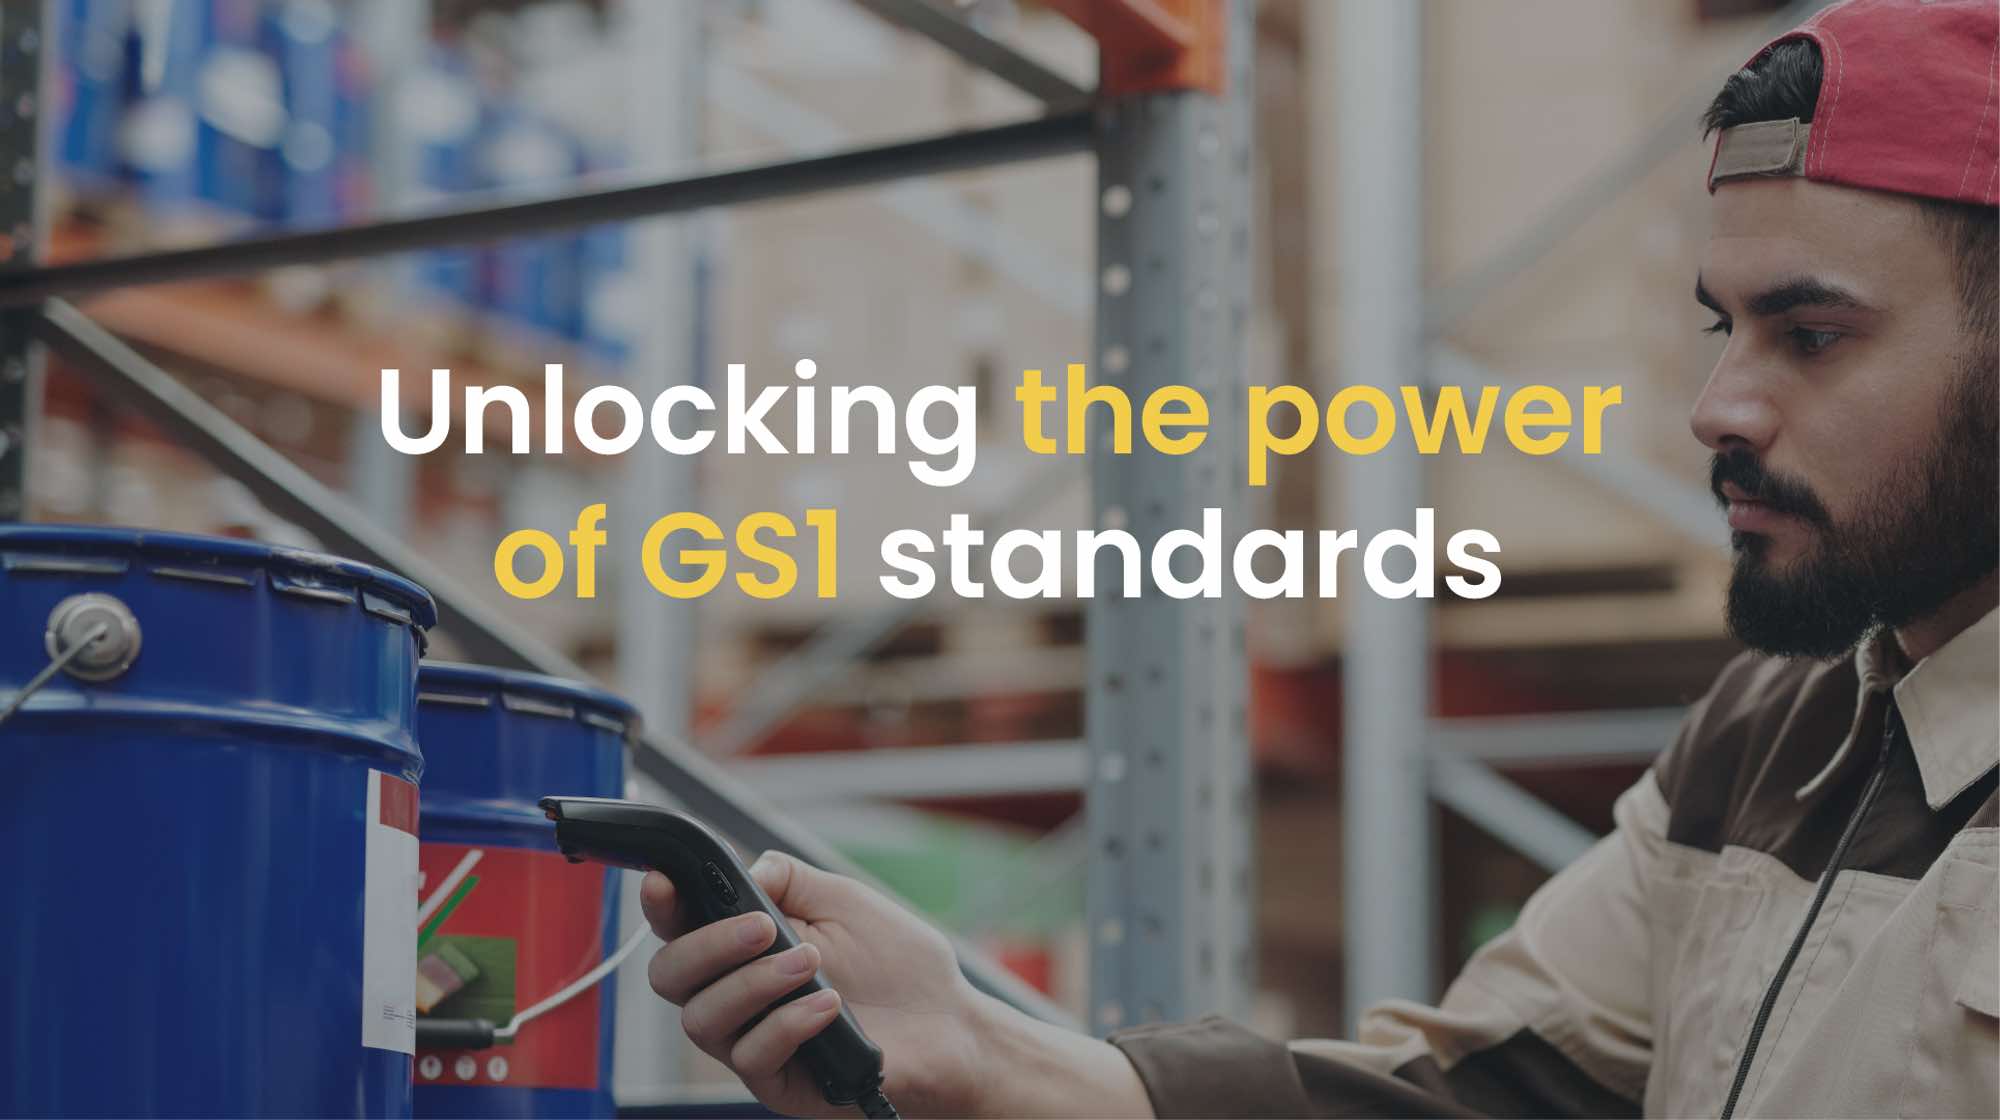 Maximise the benefits of complying with GS1 barcode standards to improve efficiency, safety, and visibility.